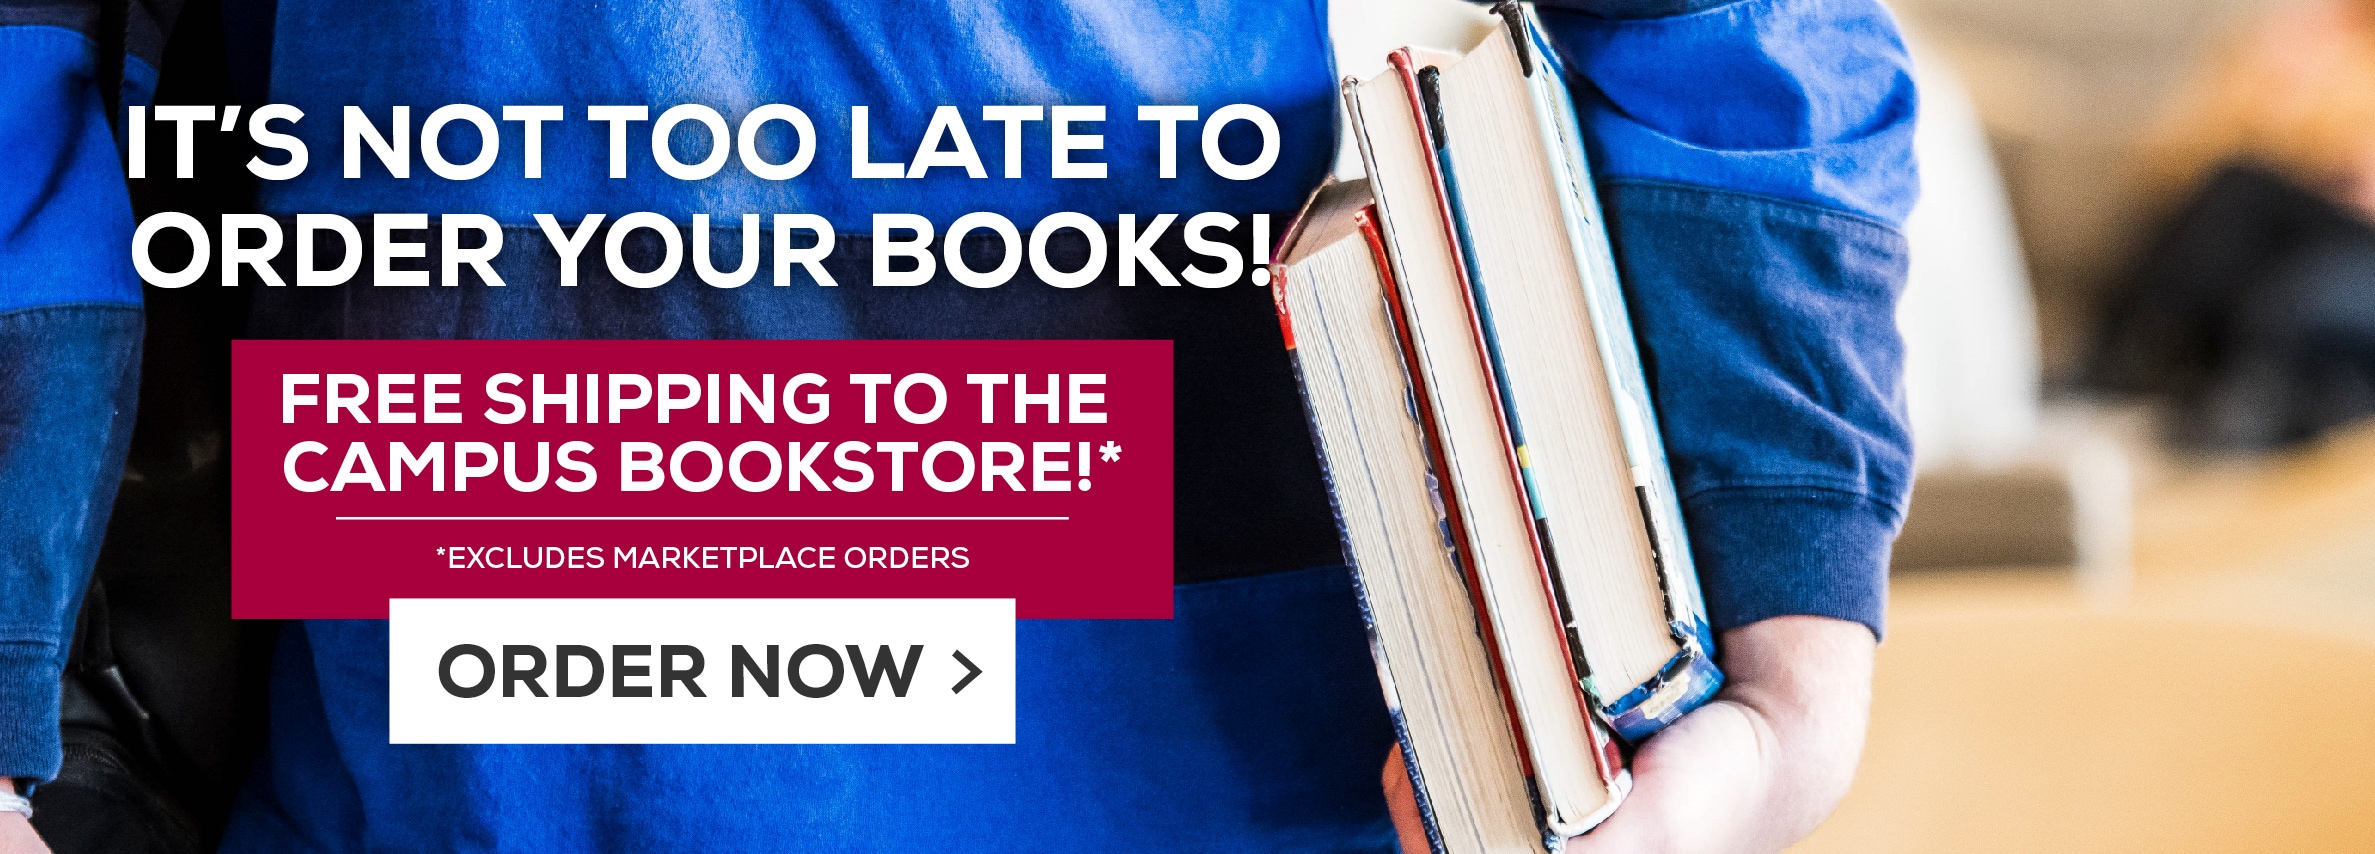 Itâ€™s not too late to order your books! Free shipping to the campus bookstore!* Excludes marketplace purchases. Order Now.